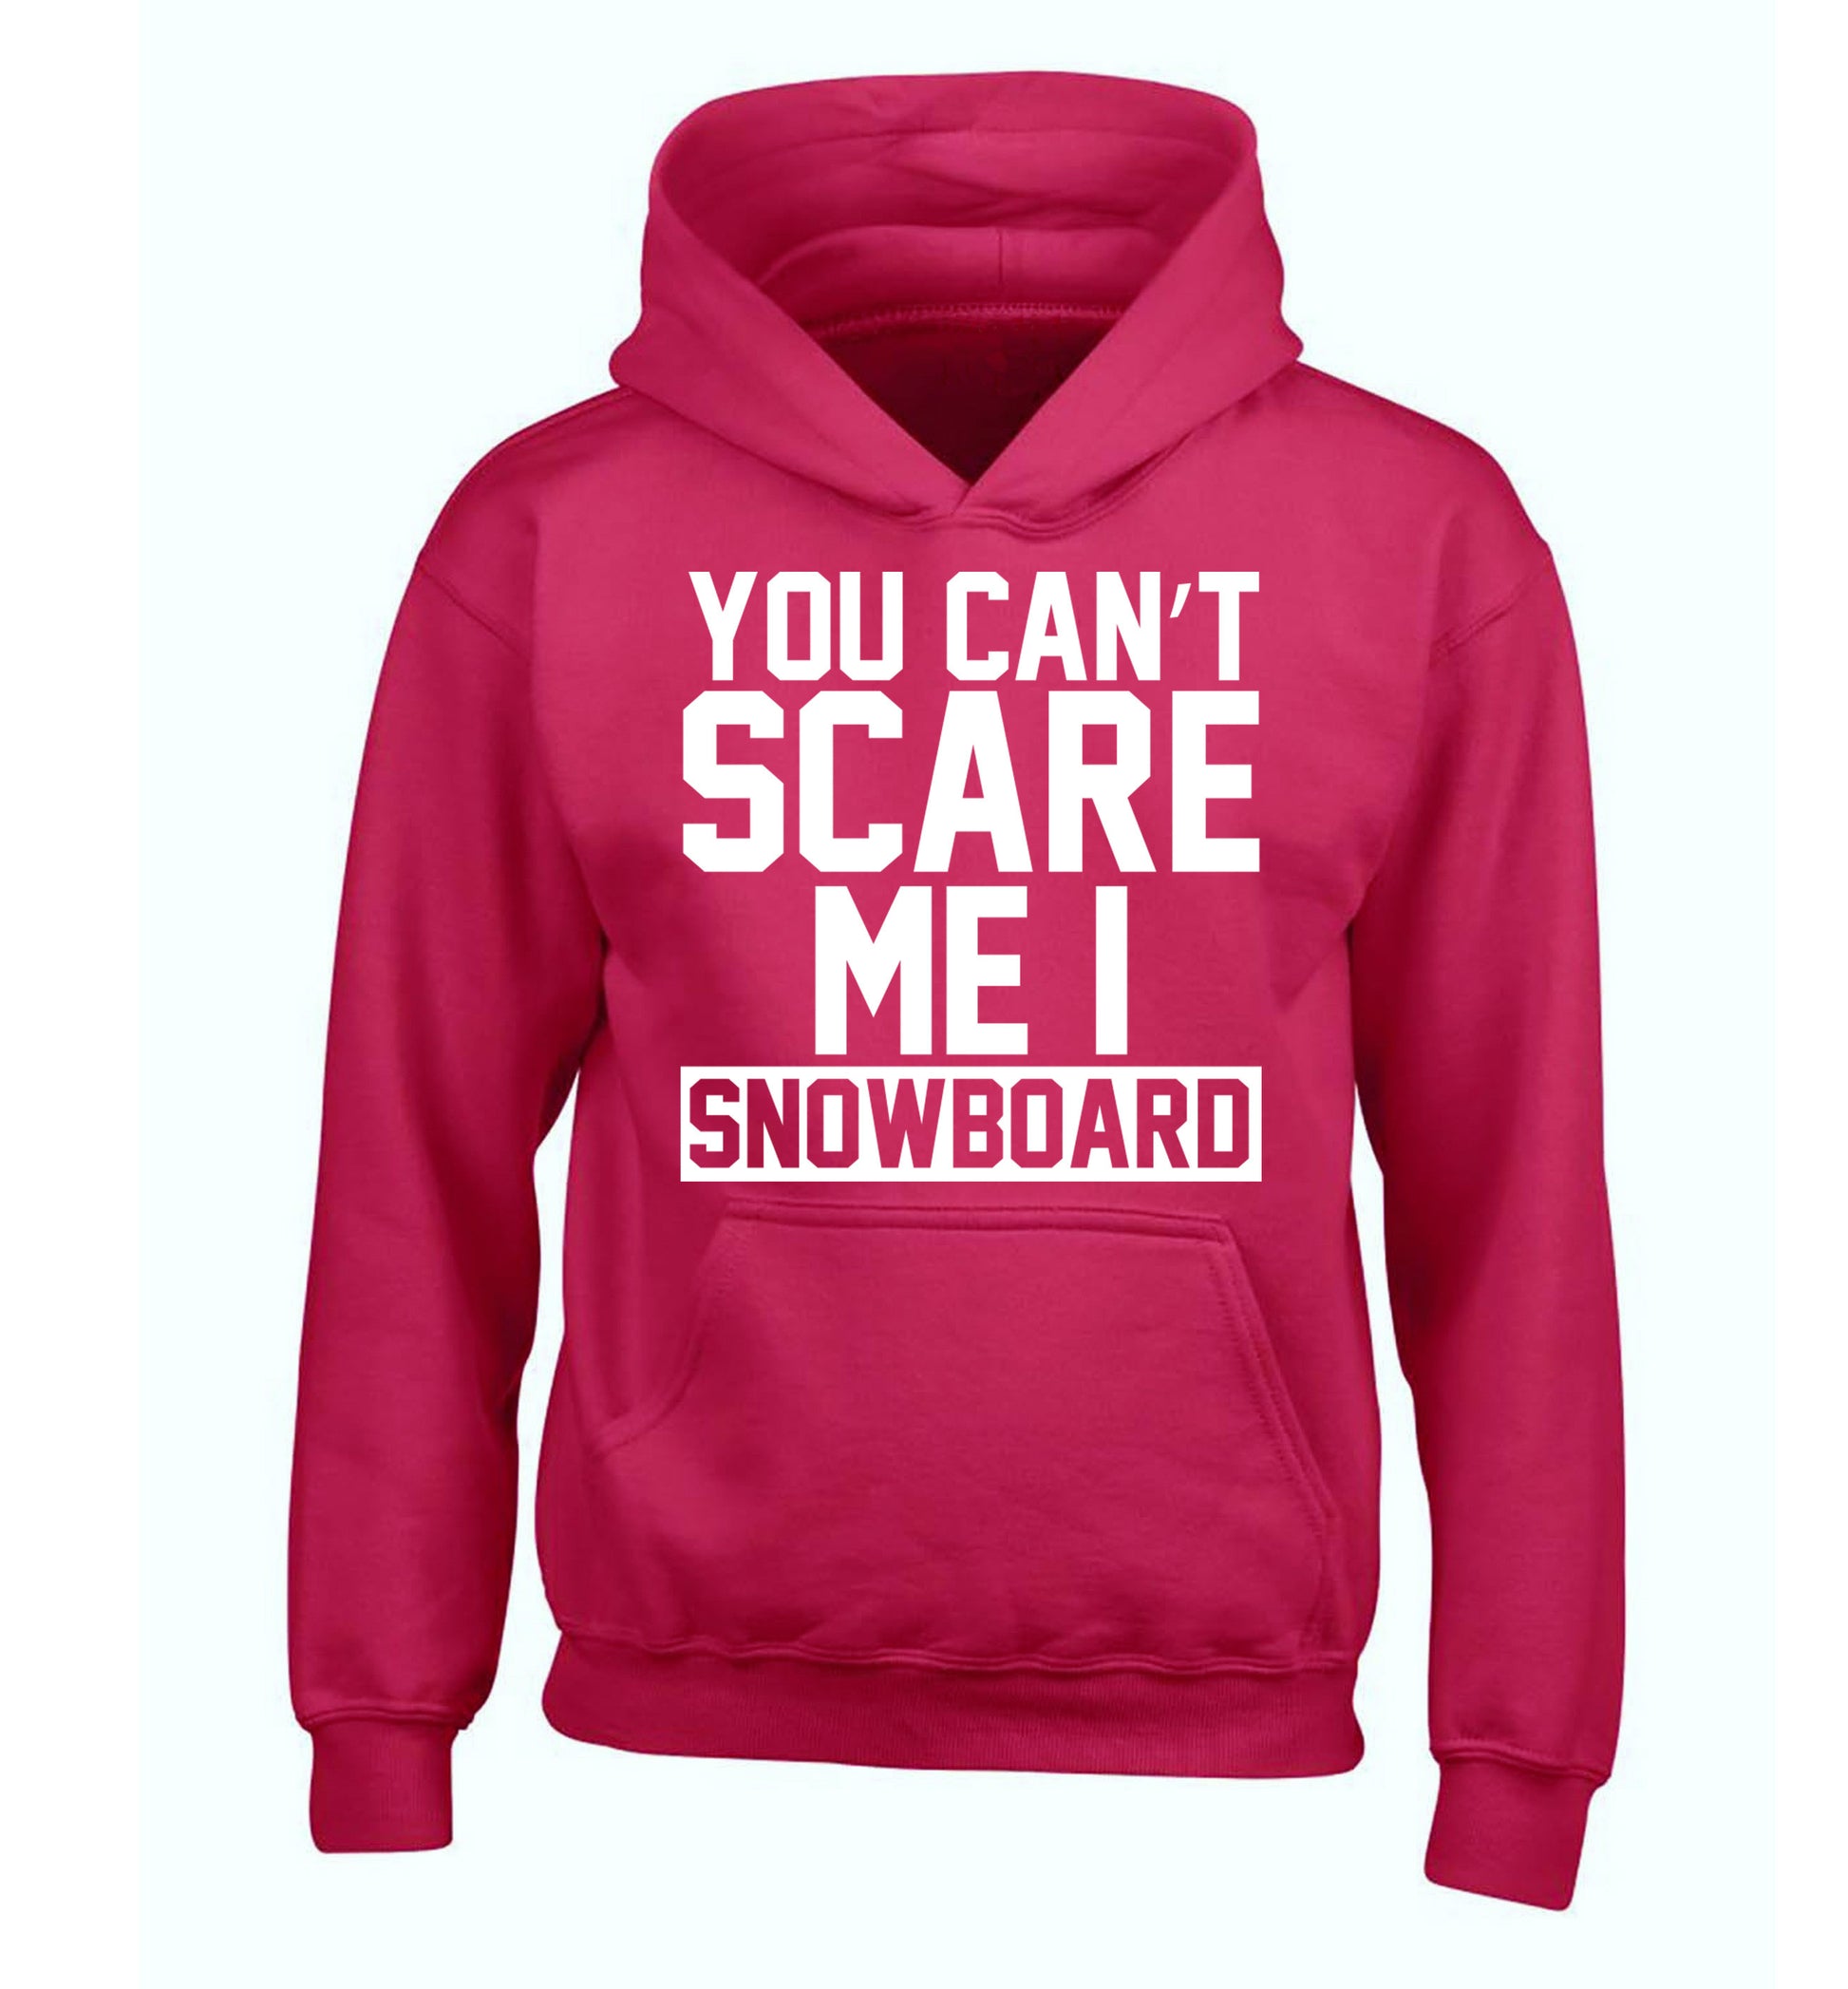 You can't scare me I snowboard children's pink hoodie 12-14 Years